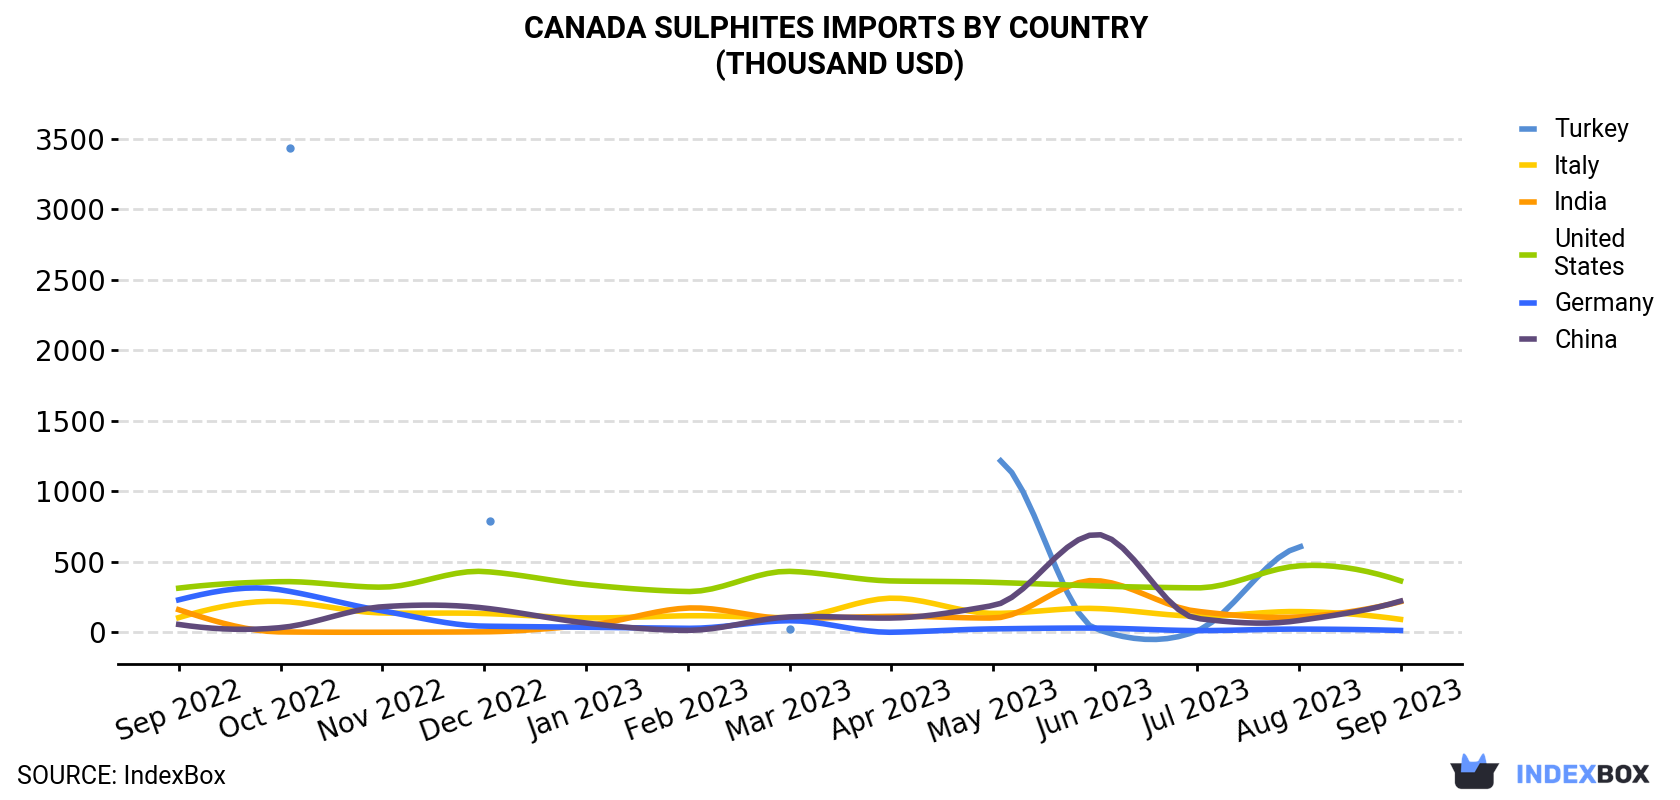 Canada Sulphites Imports By Country (Thousand USD)